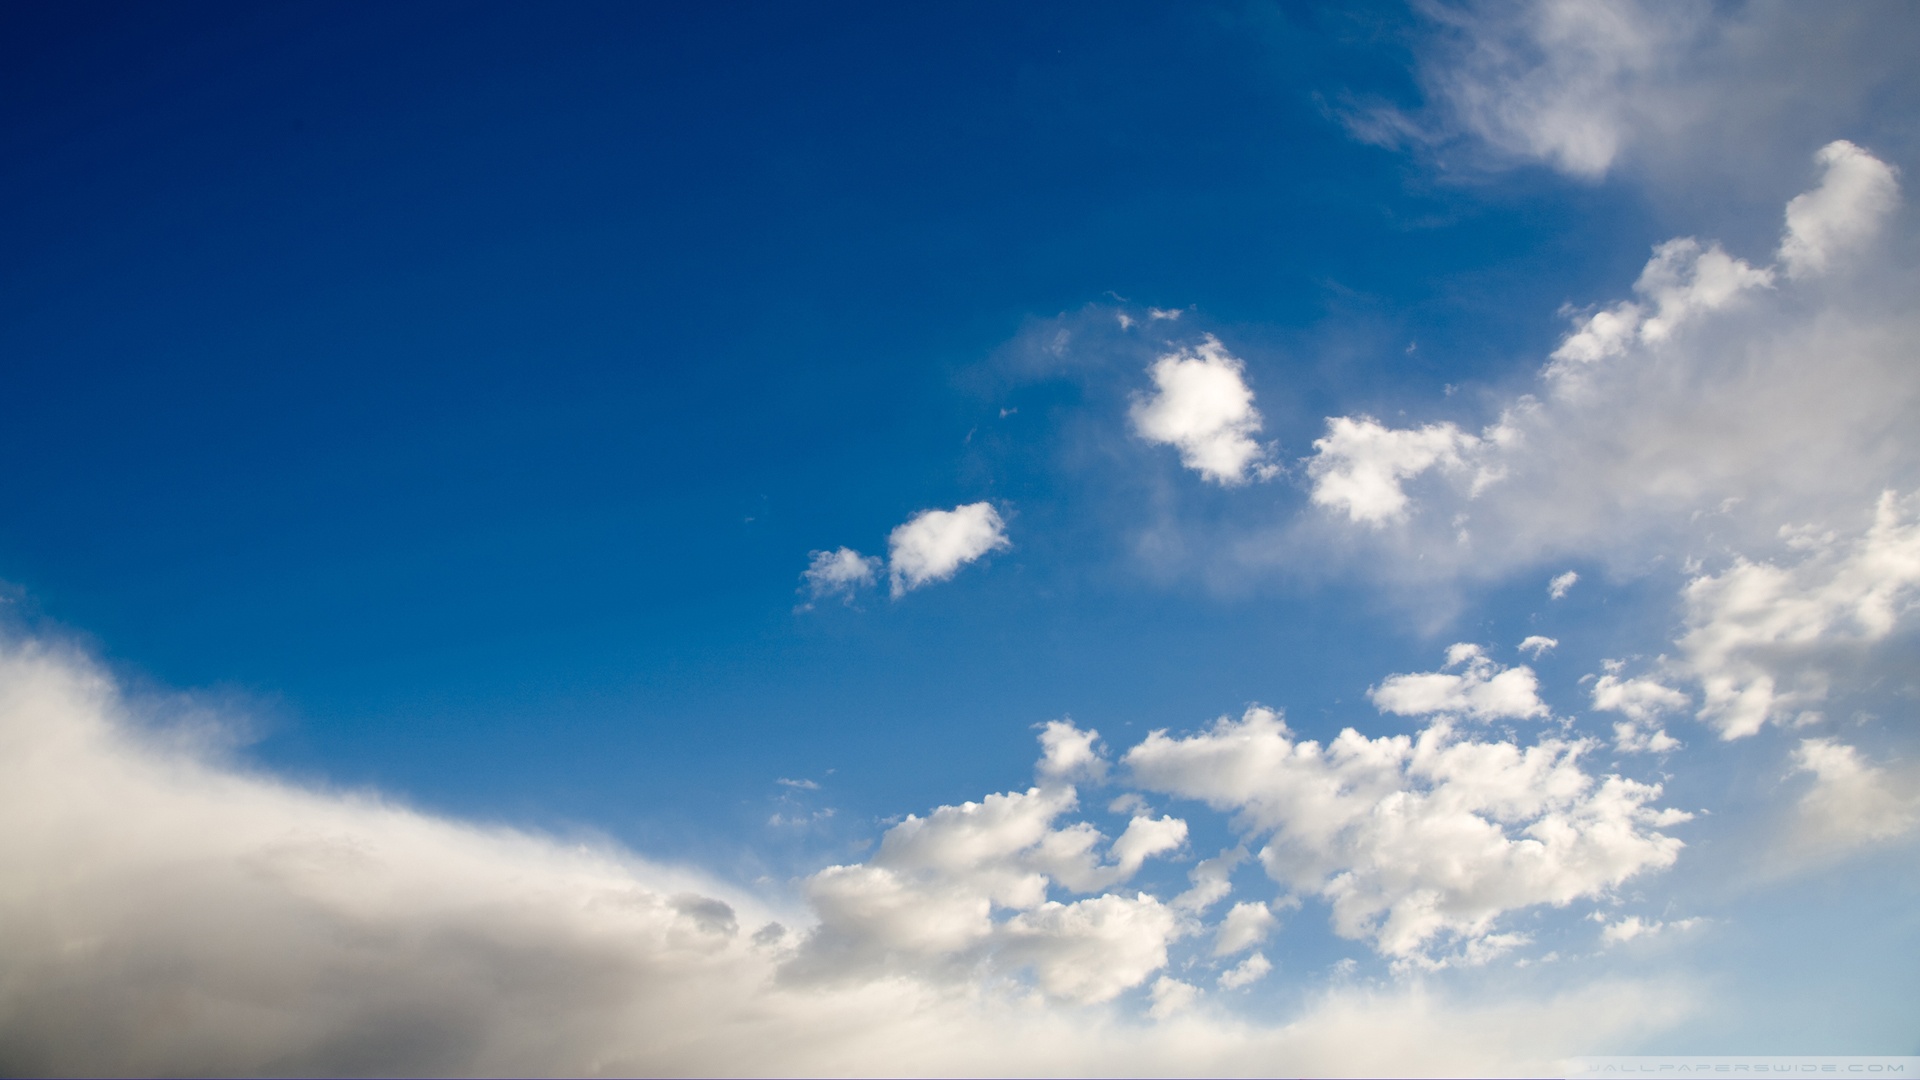 Deep Blue Sky With White Clouds Wallpaper